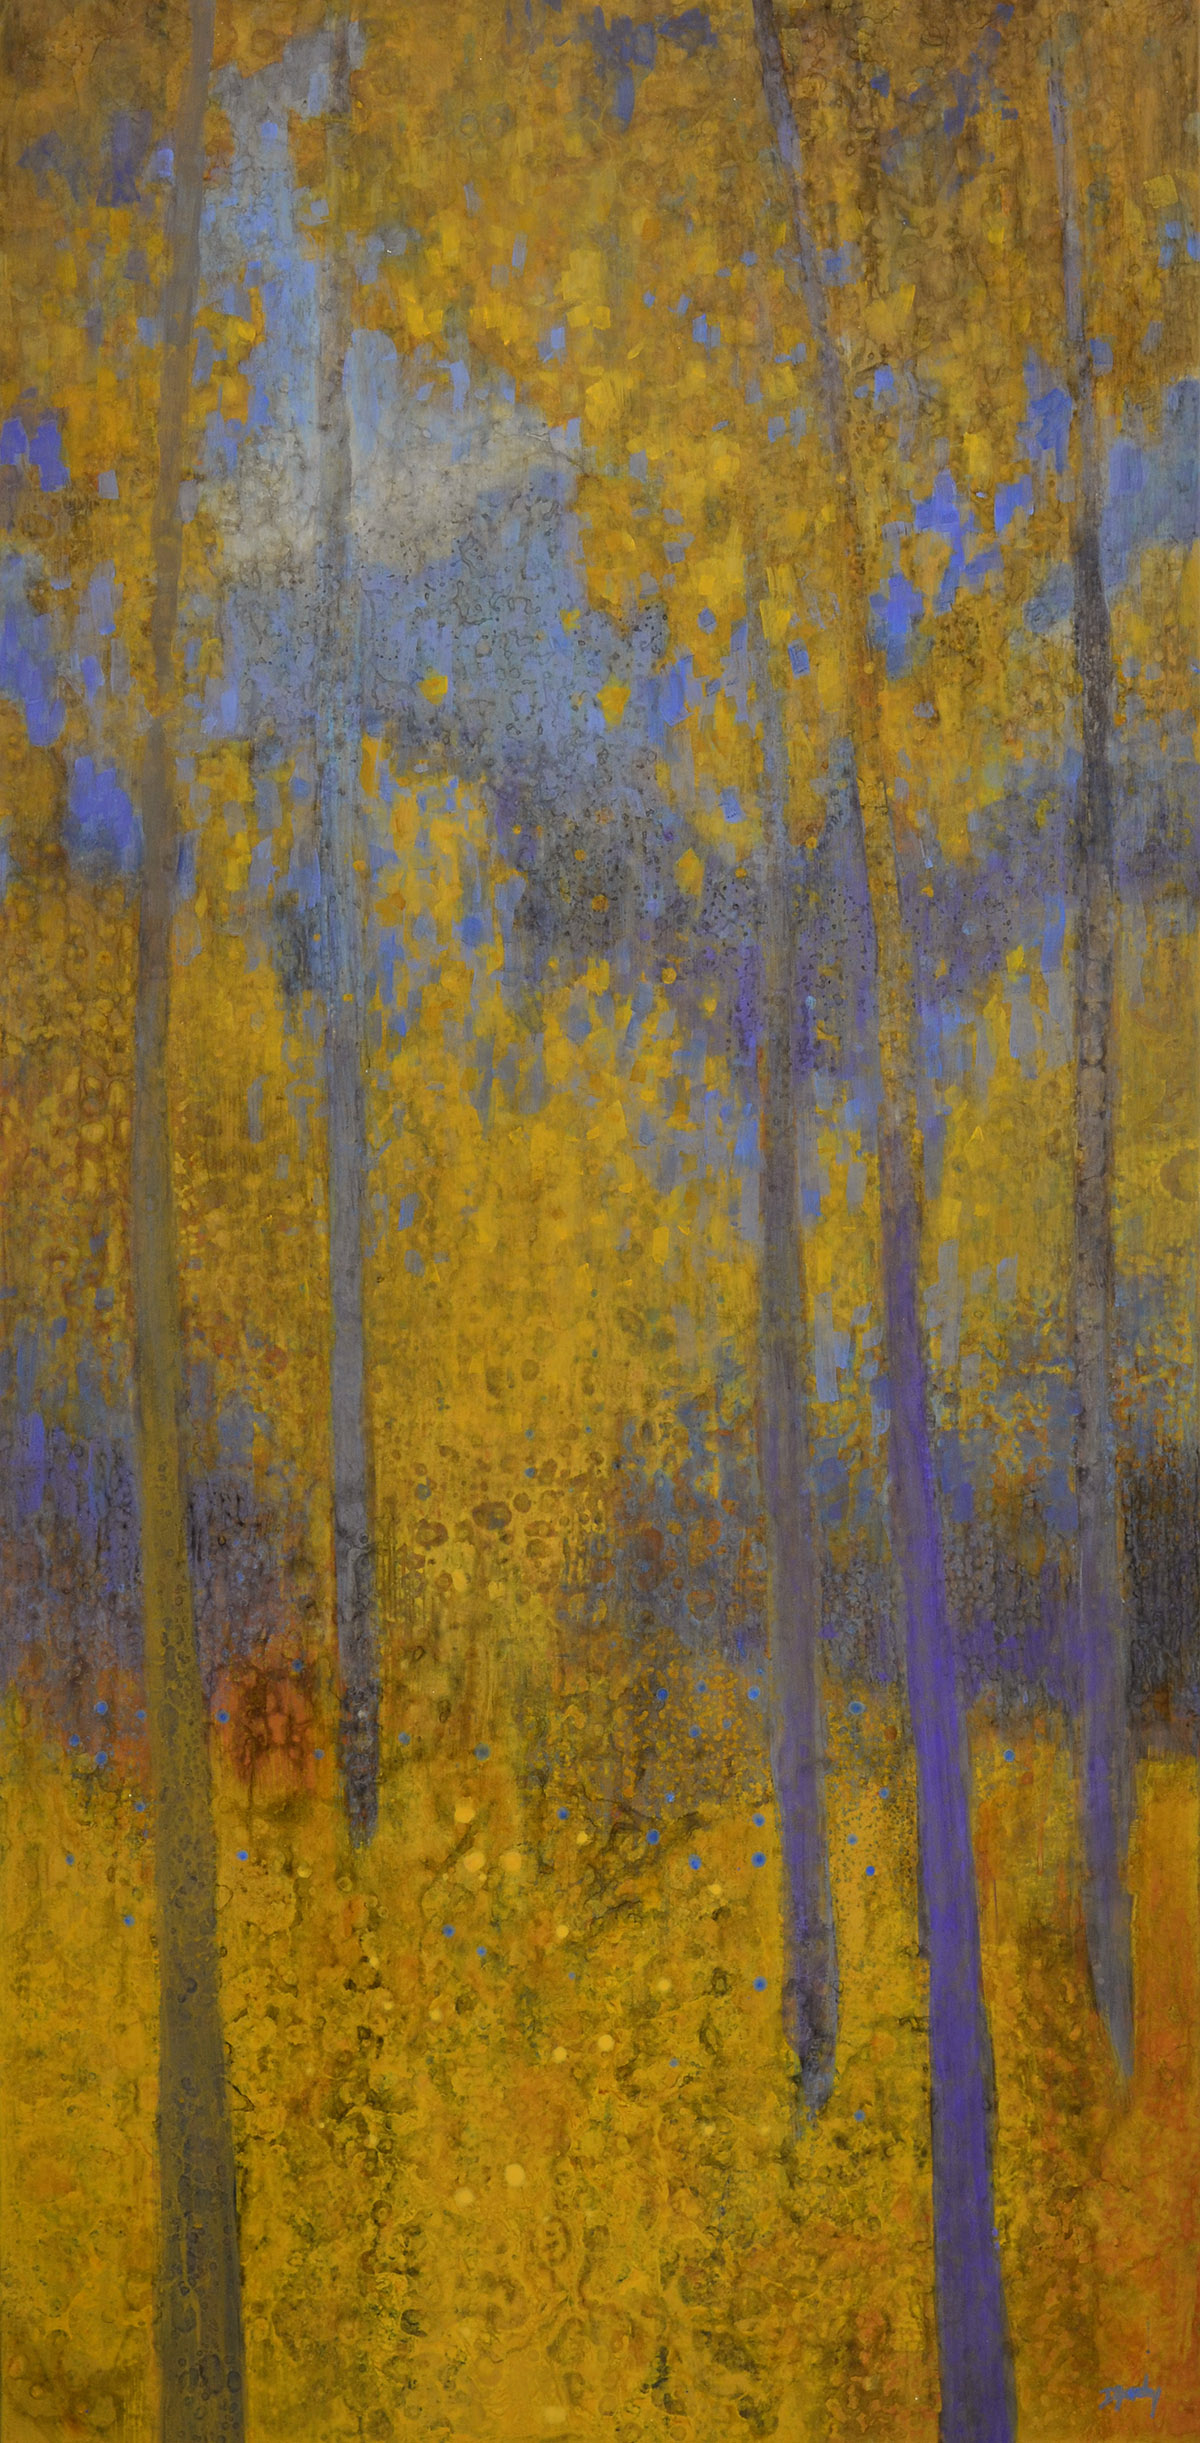 aspens, leaves, gold and yellow, trees, soft earth tones